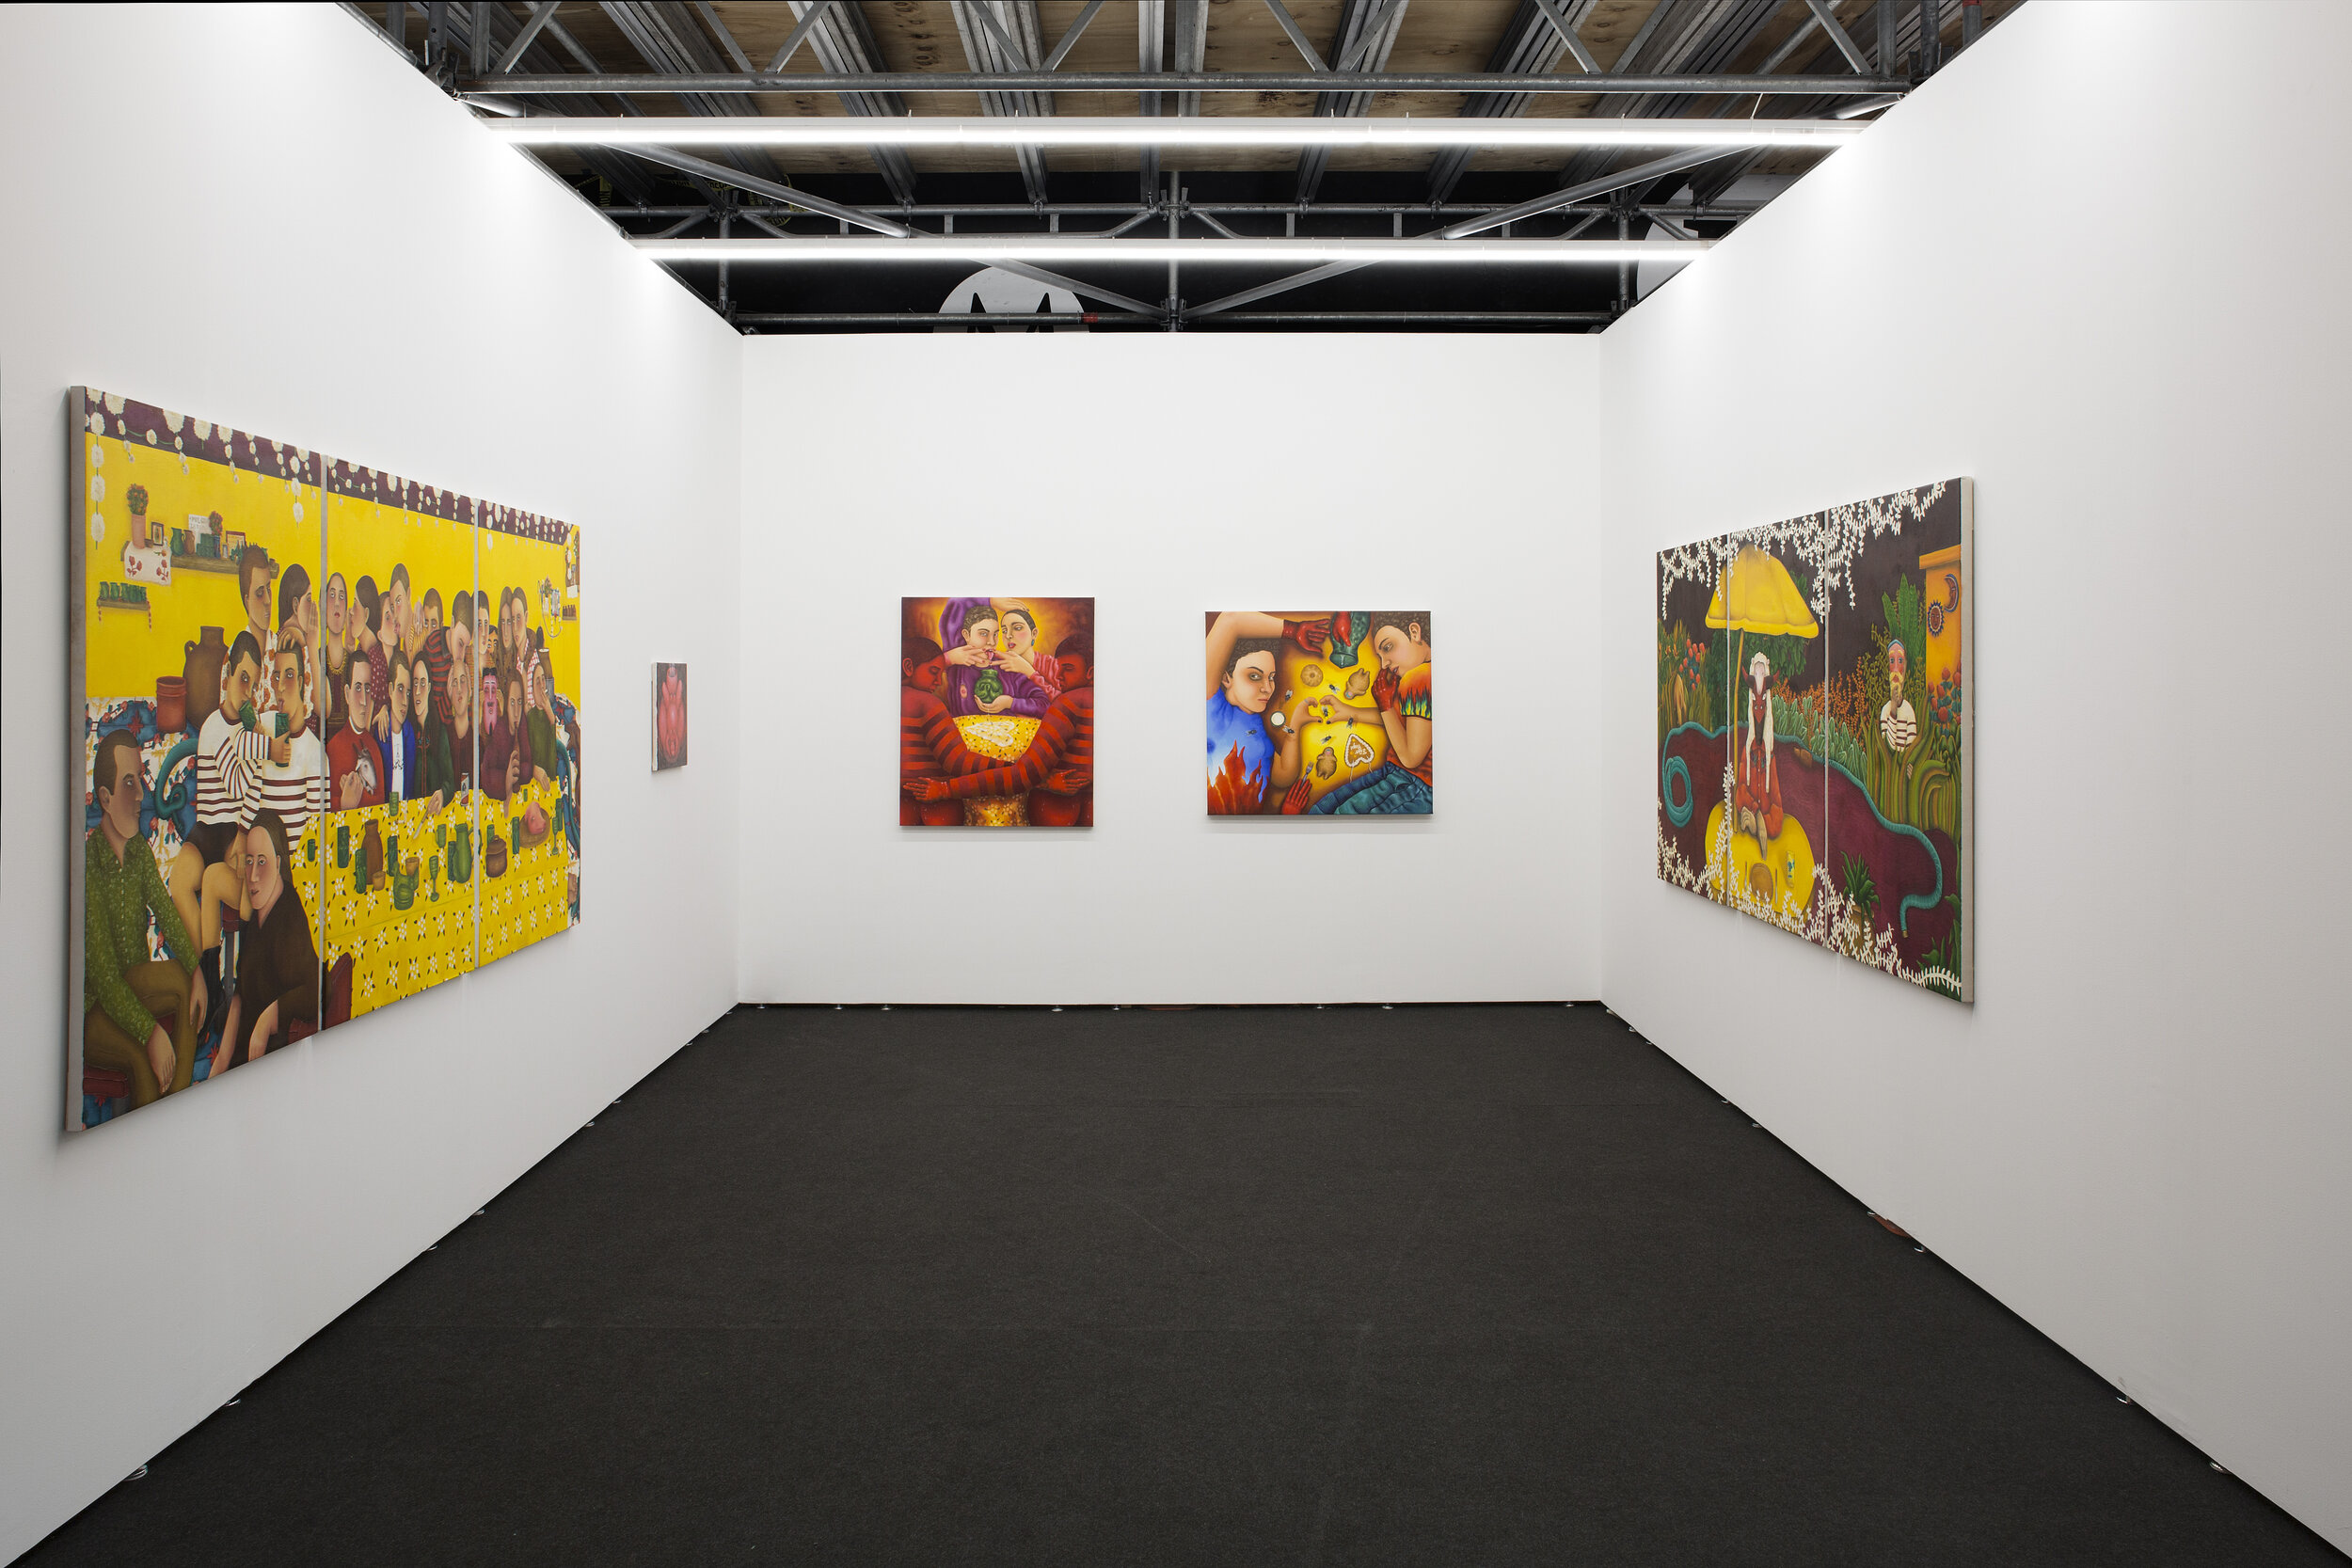  Installation View, Material Art Fair, Thierry Goldberg Gallery, Mexico City     